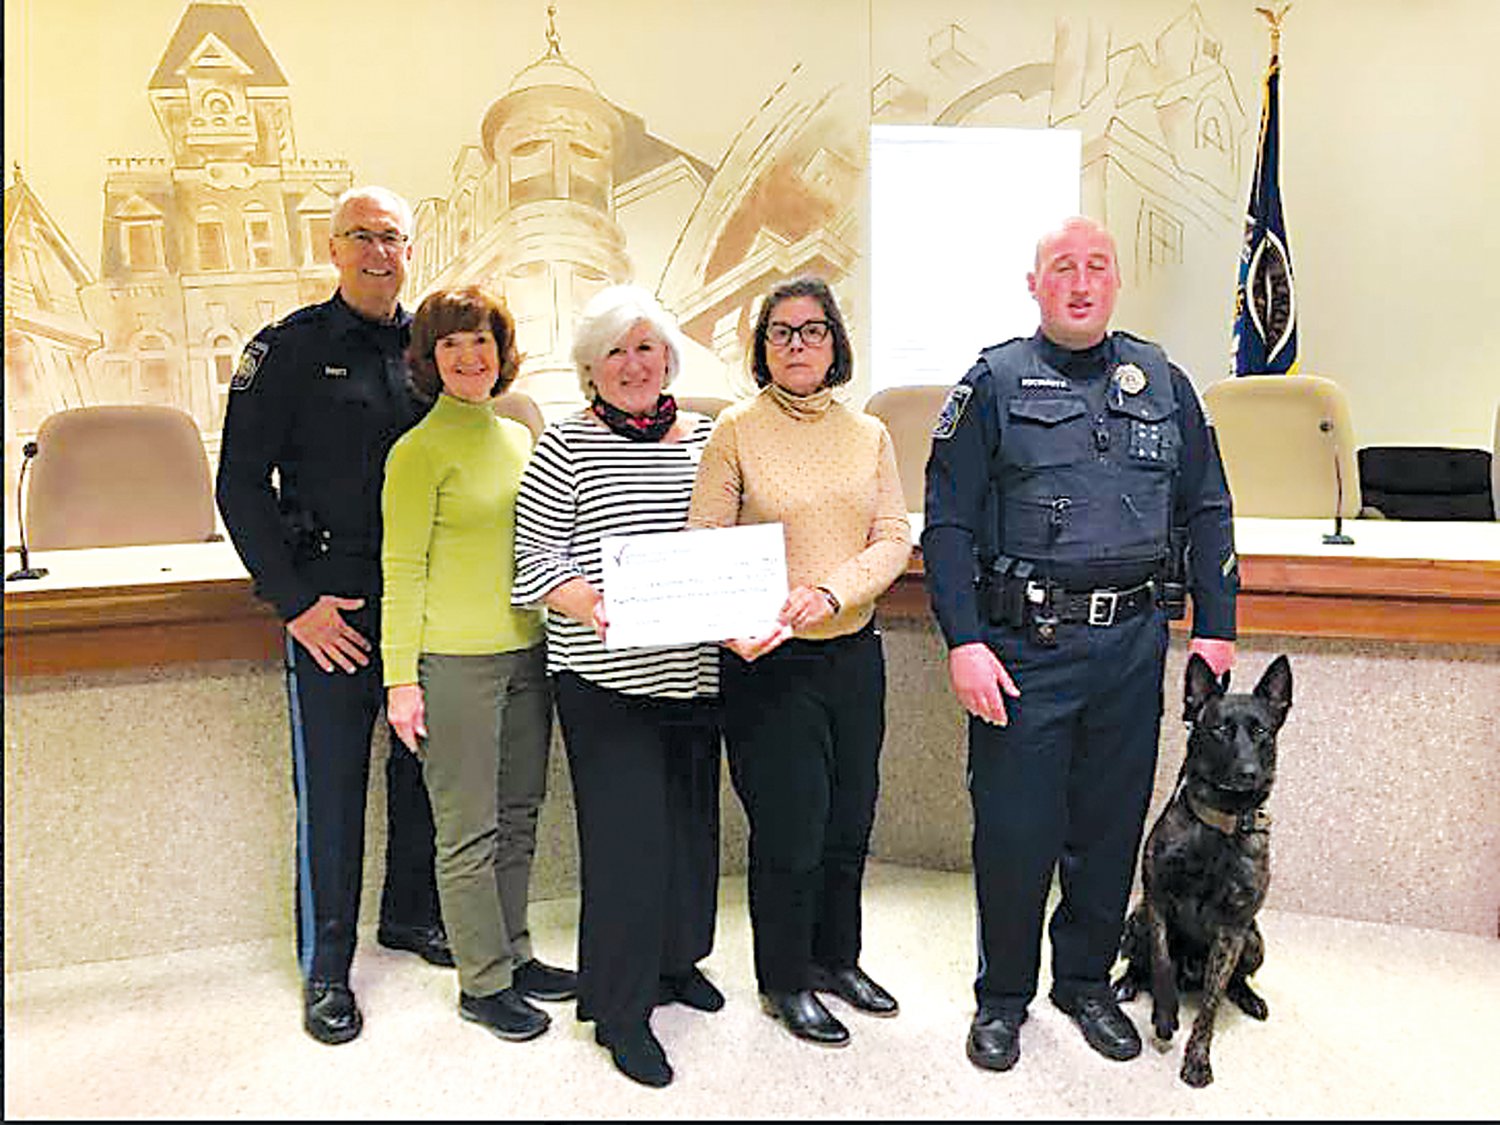 From left are: Chief Karl Knott, Mary Ellen Stanton, Marilyn Mele, Barbara Ann Price, Officer Andrew Hochmuth and, star of the event, Baron.